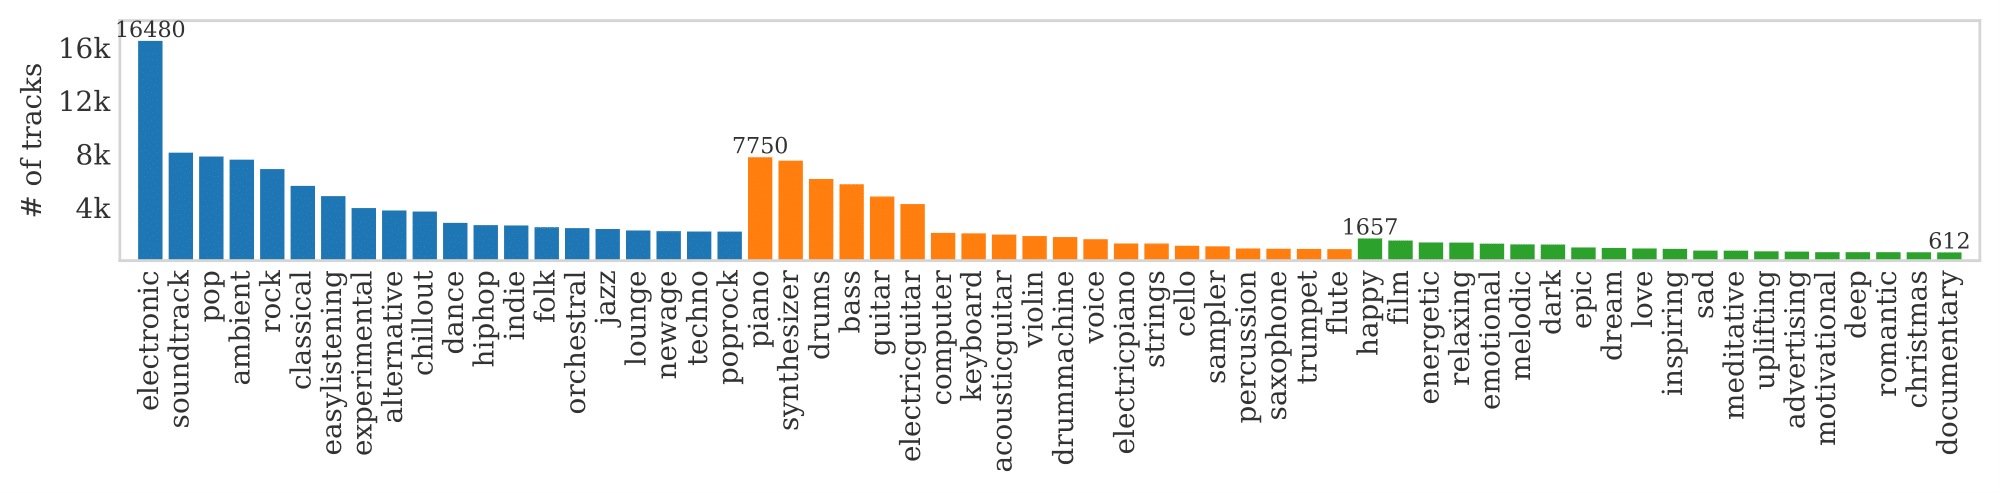 Top 20 tags per category (genre, instrument, mood/theme) in the MTG-Jamendo dataset